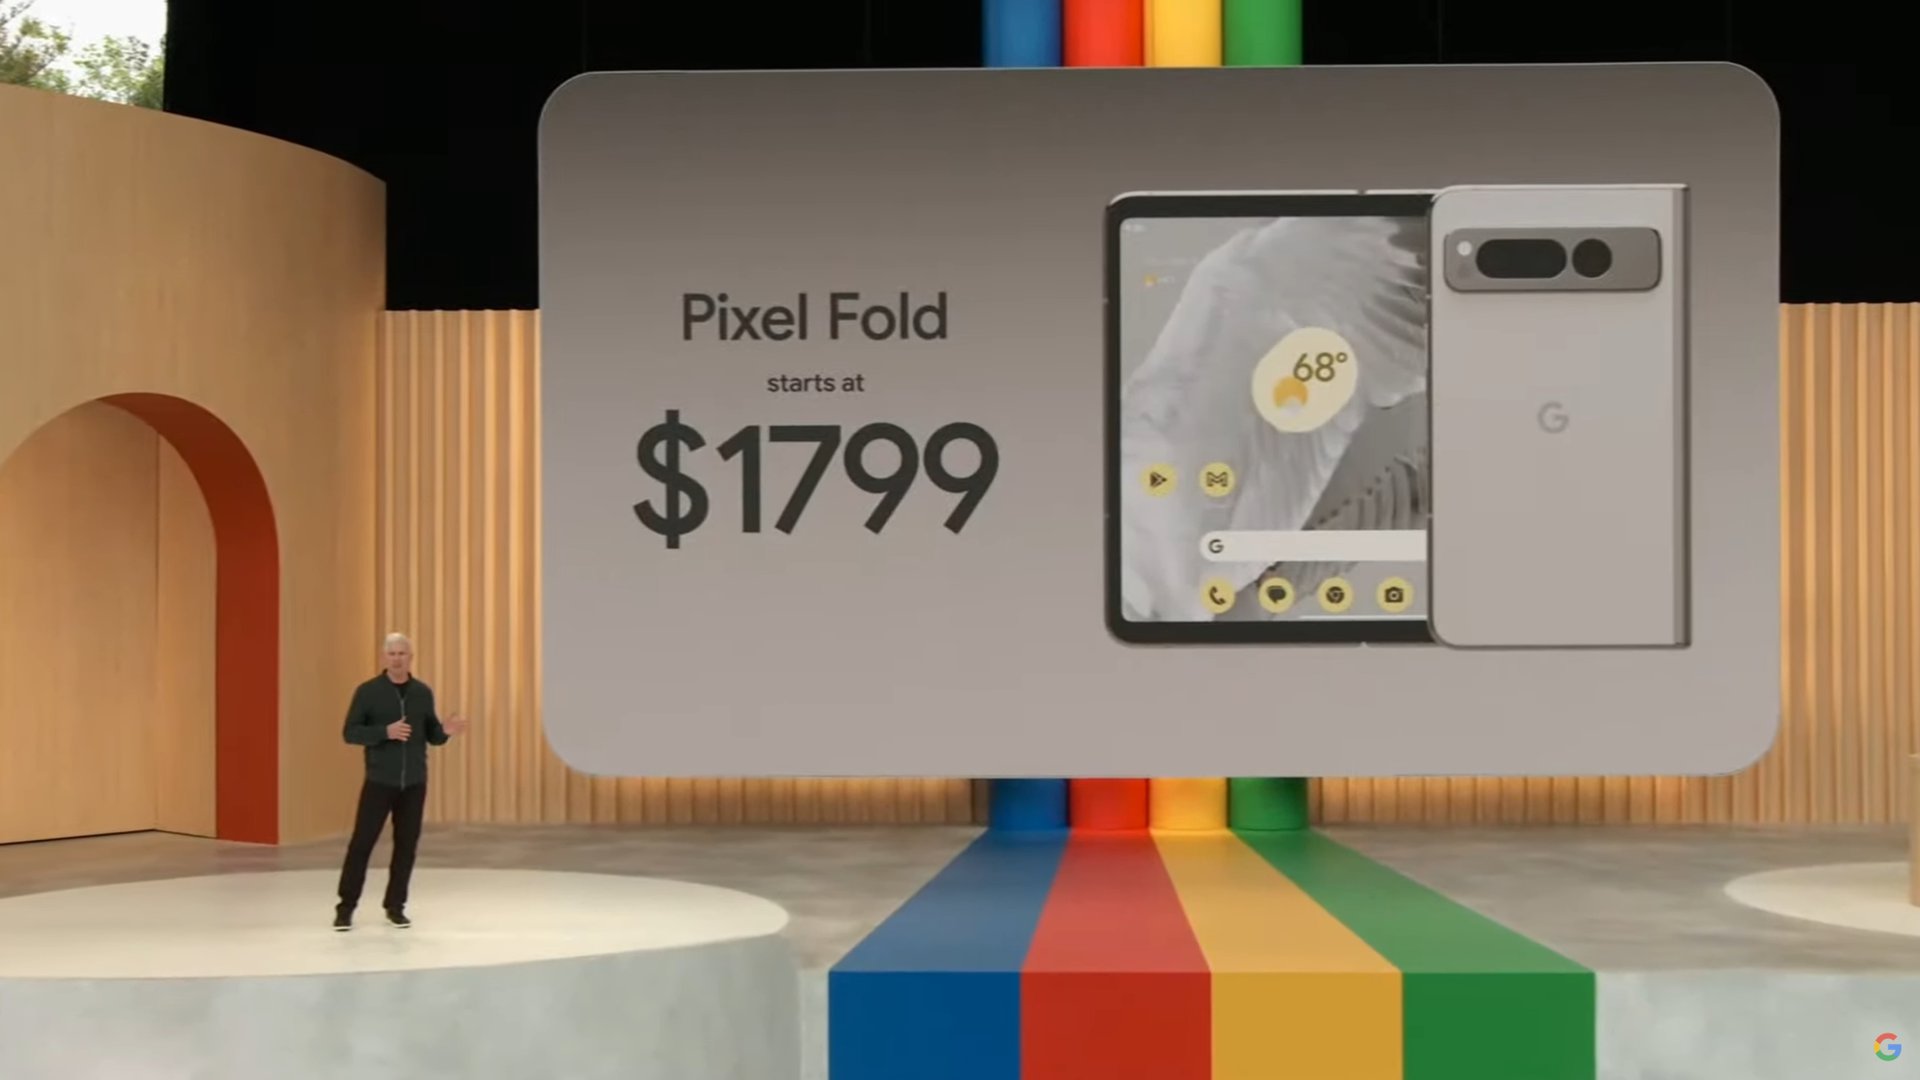 We asked, you told us: You’re on the wall about buying a Pixel Fold